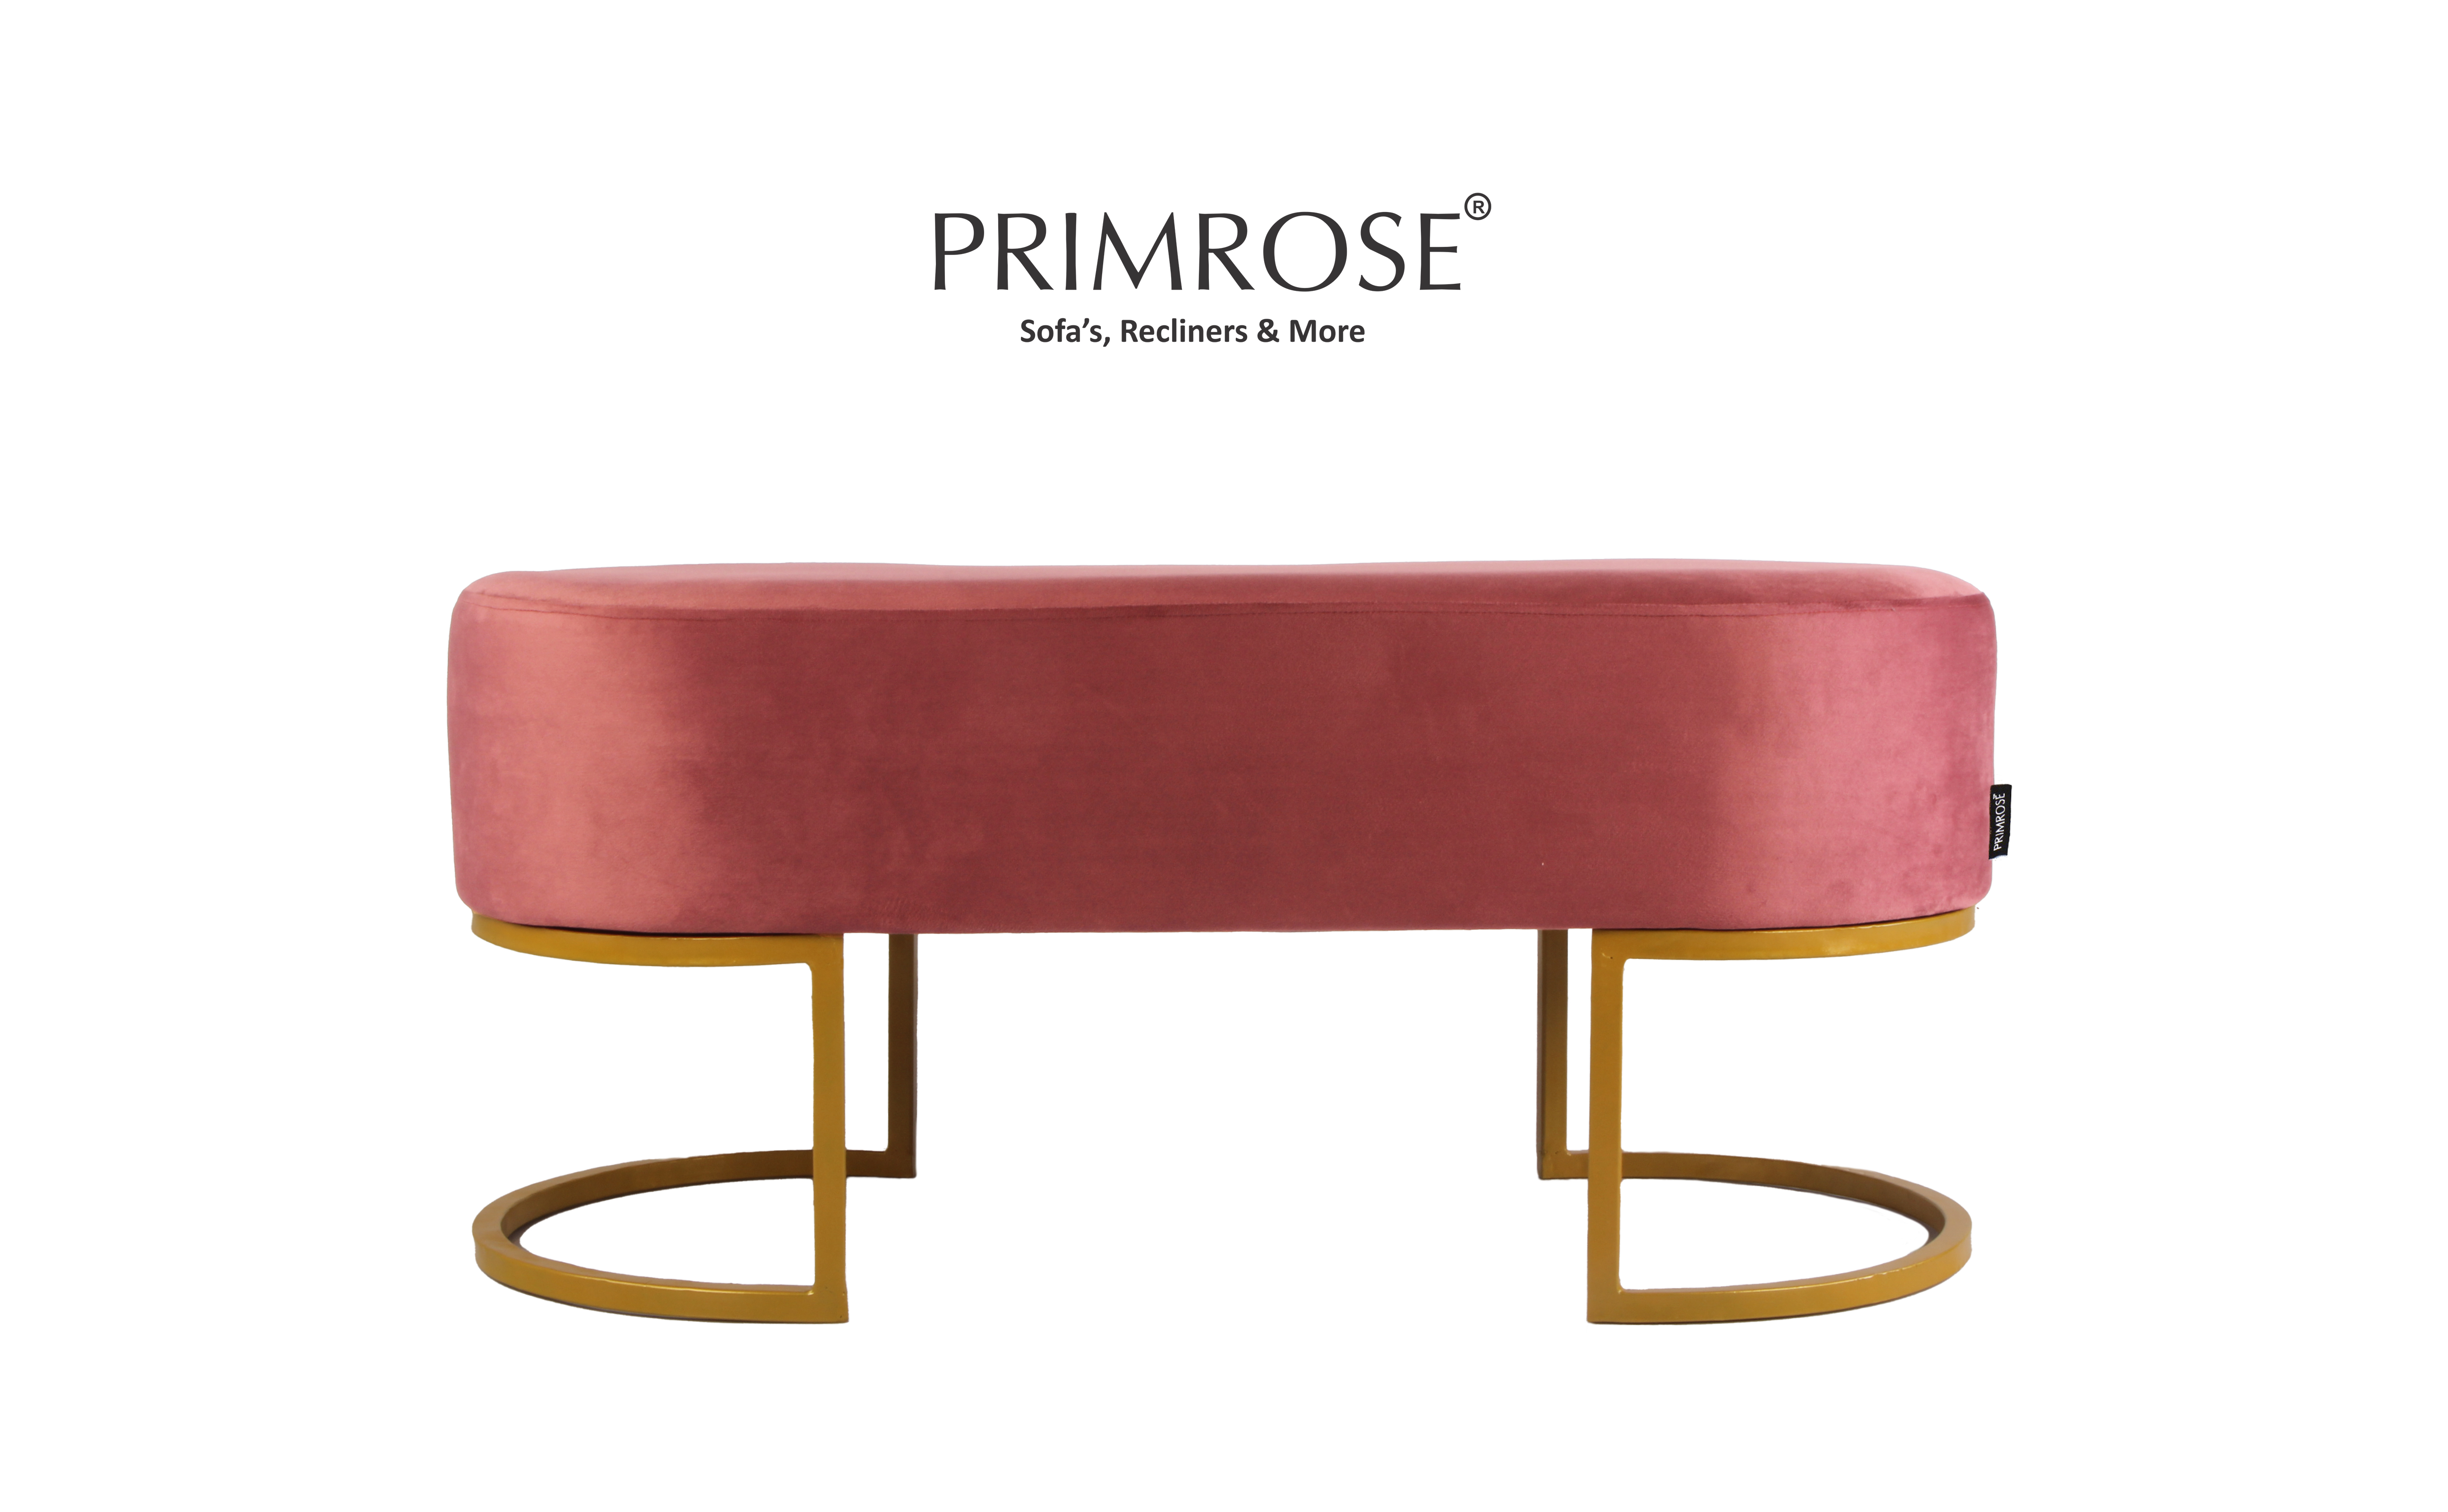 Primrose Ottoman Slice - Comfortable Upholstered Stool With Brawny Golden Metal Frame Stand And Delicate But Supple Velvet Fabric Wrapped Over  